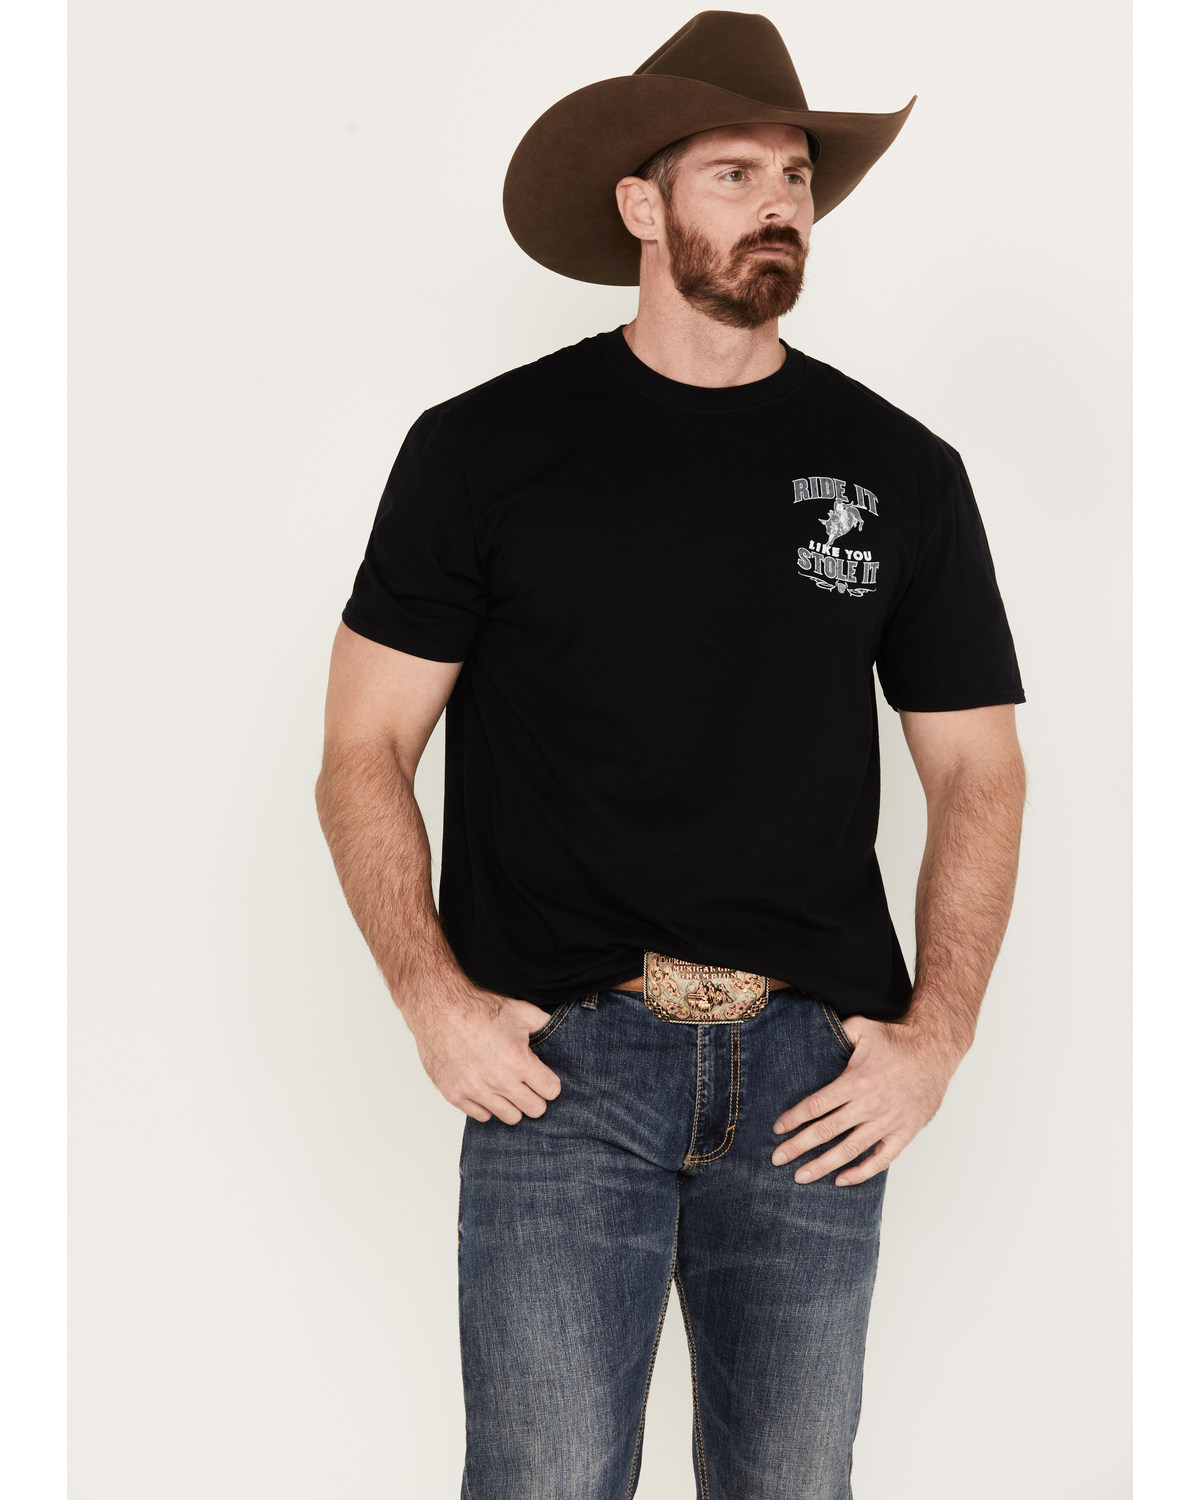 Cowboy Hardware Men's Ride It Like You Stole Short Sleeve Graphic T-Shirt